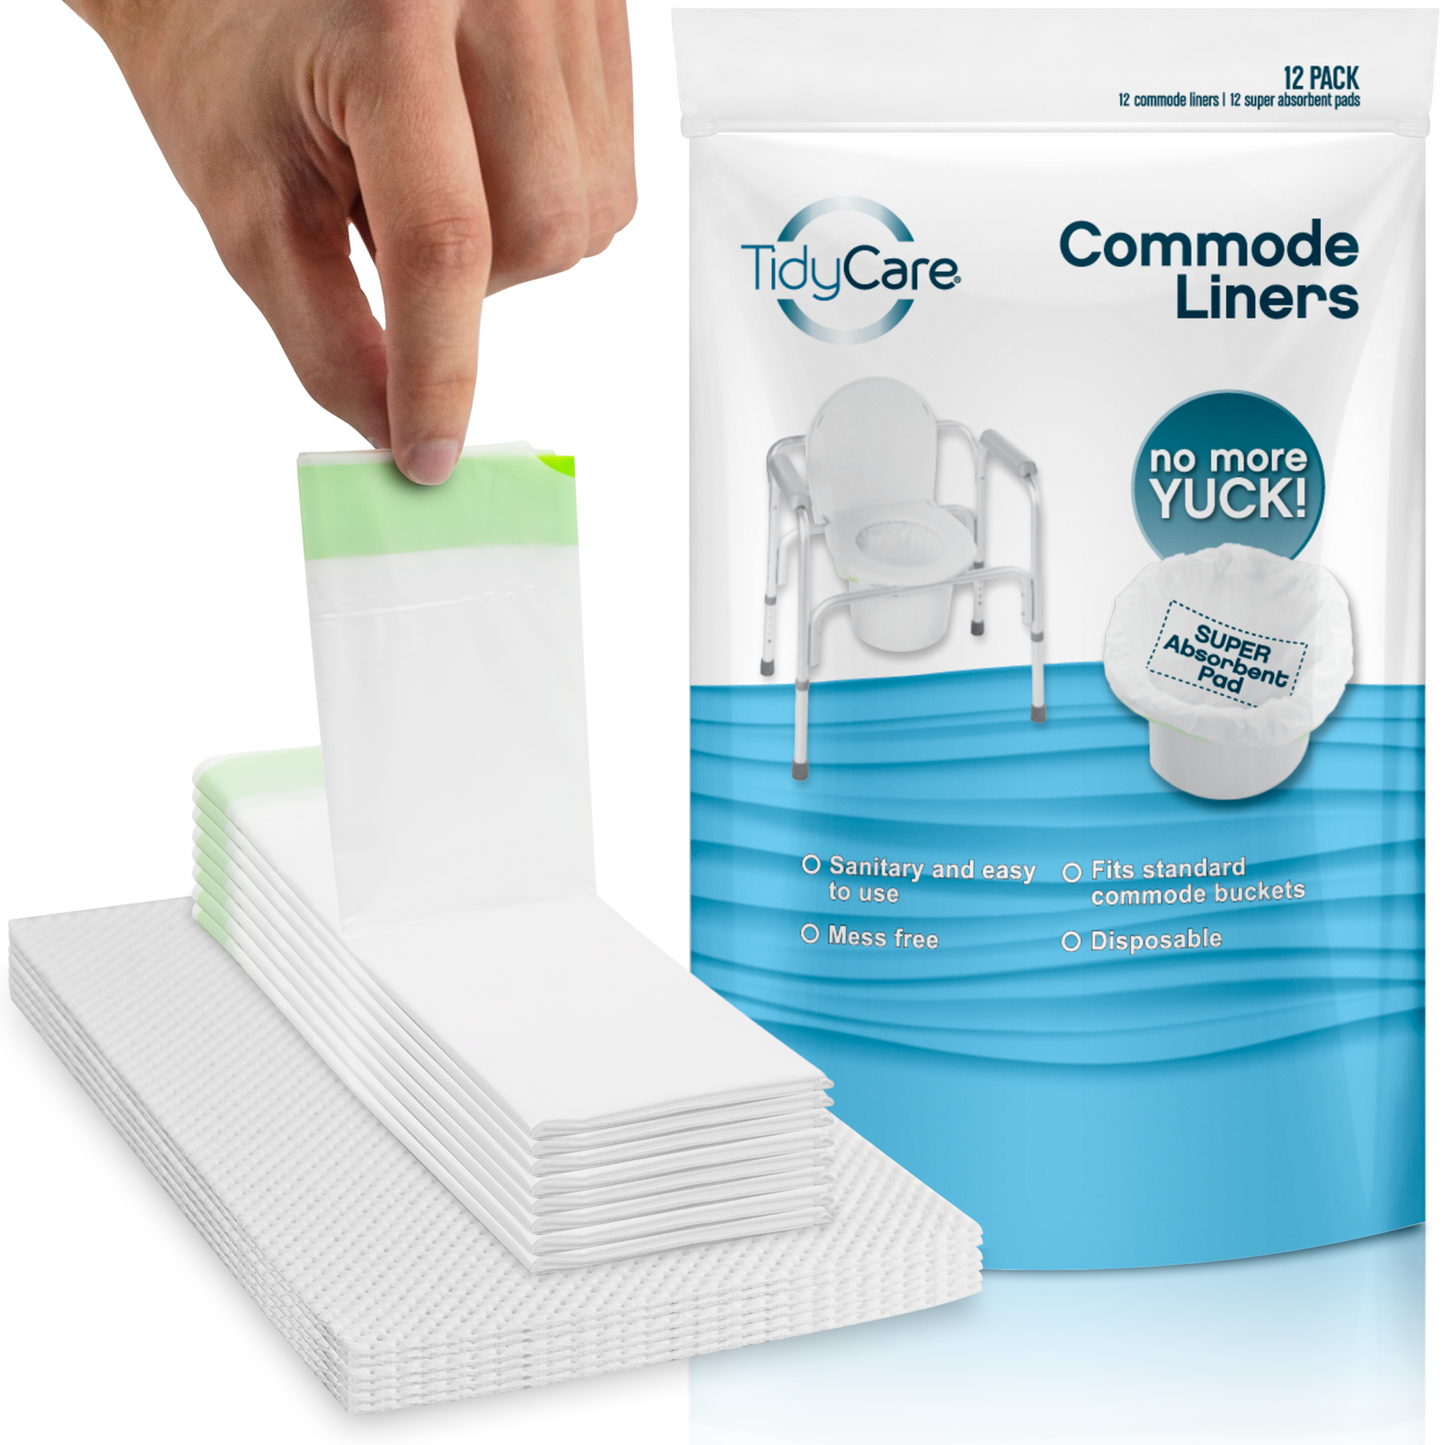 TidyCare Commode Liners and Absorbent Pads for Bedside Toilet